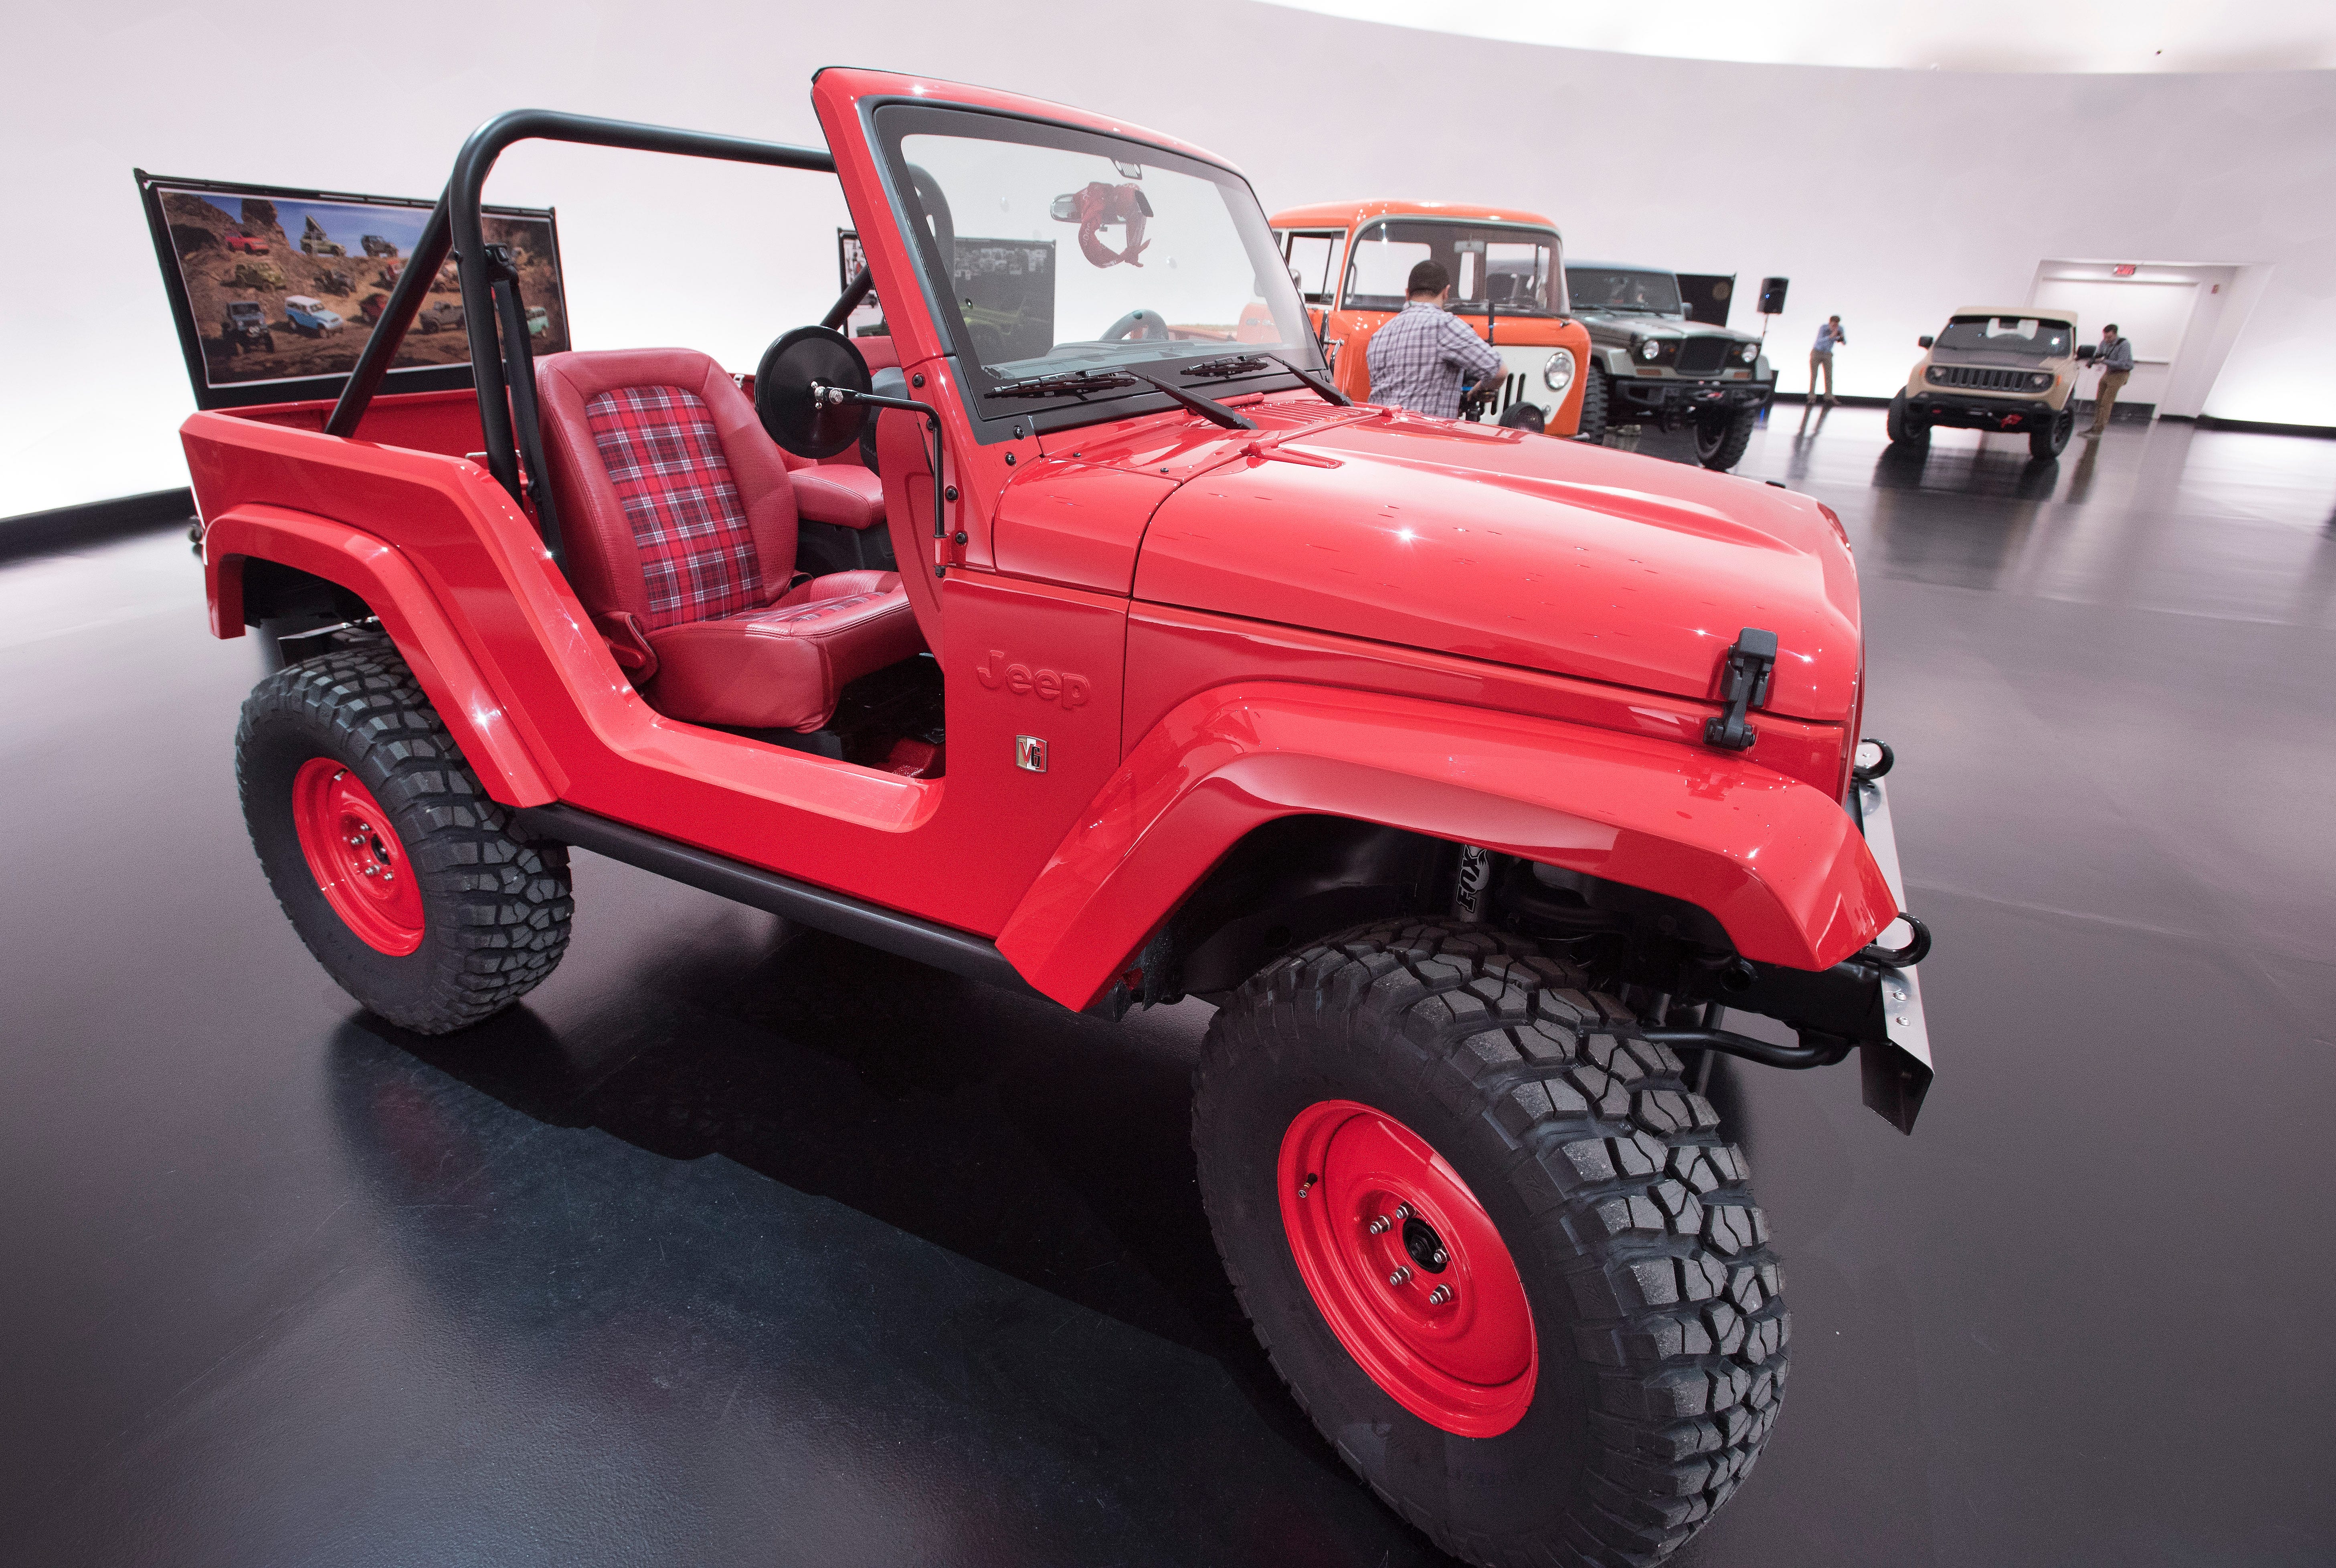 The Jeep Shortcut, inspired by the classic CJ-5 to handle tight, winding trails was revealed ahead of an upcoming "Easter Jeep Safari" off-road event at FCA world headquarters in Auburn Hills, Michigan on March 10, 2016.